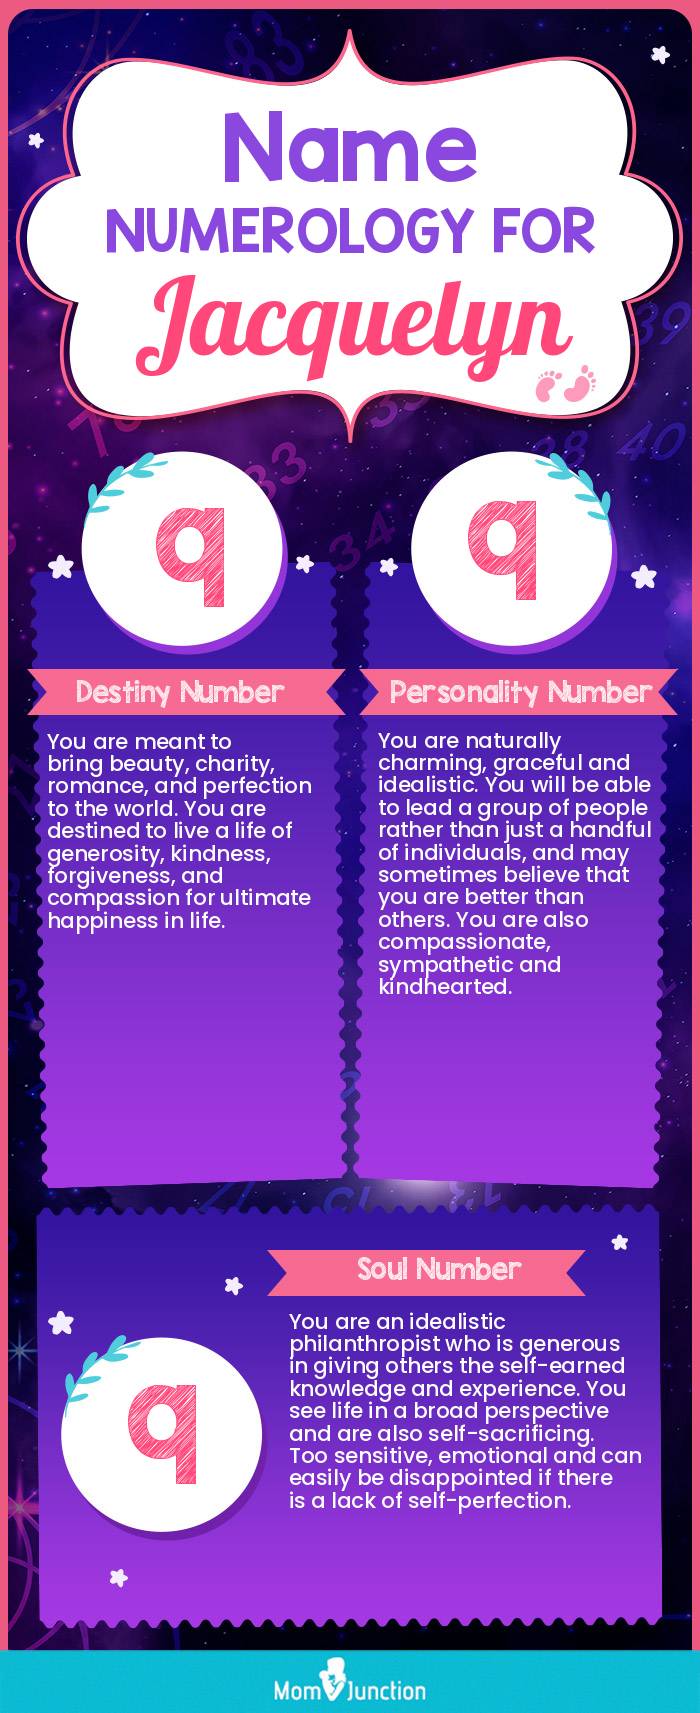 name-numerology-for-Jacquelyn-girl